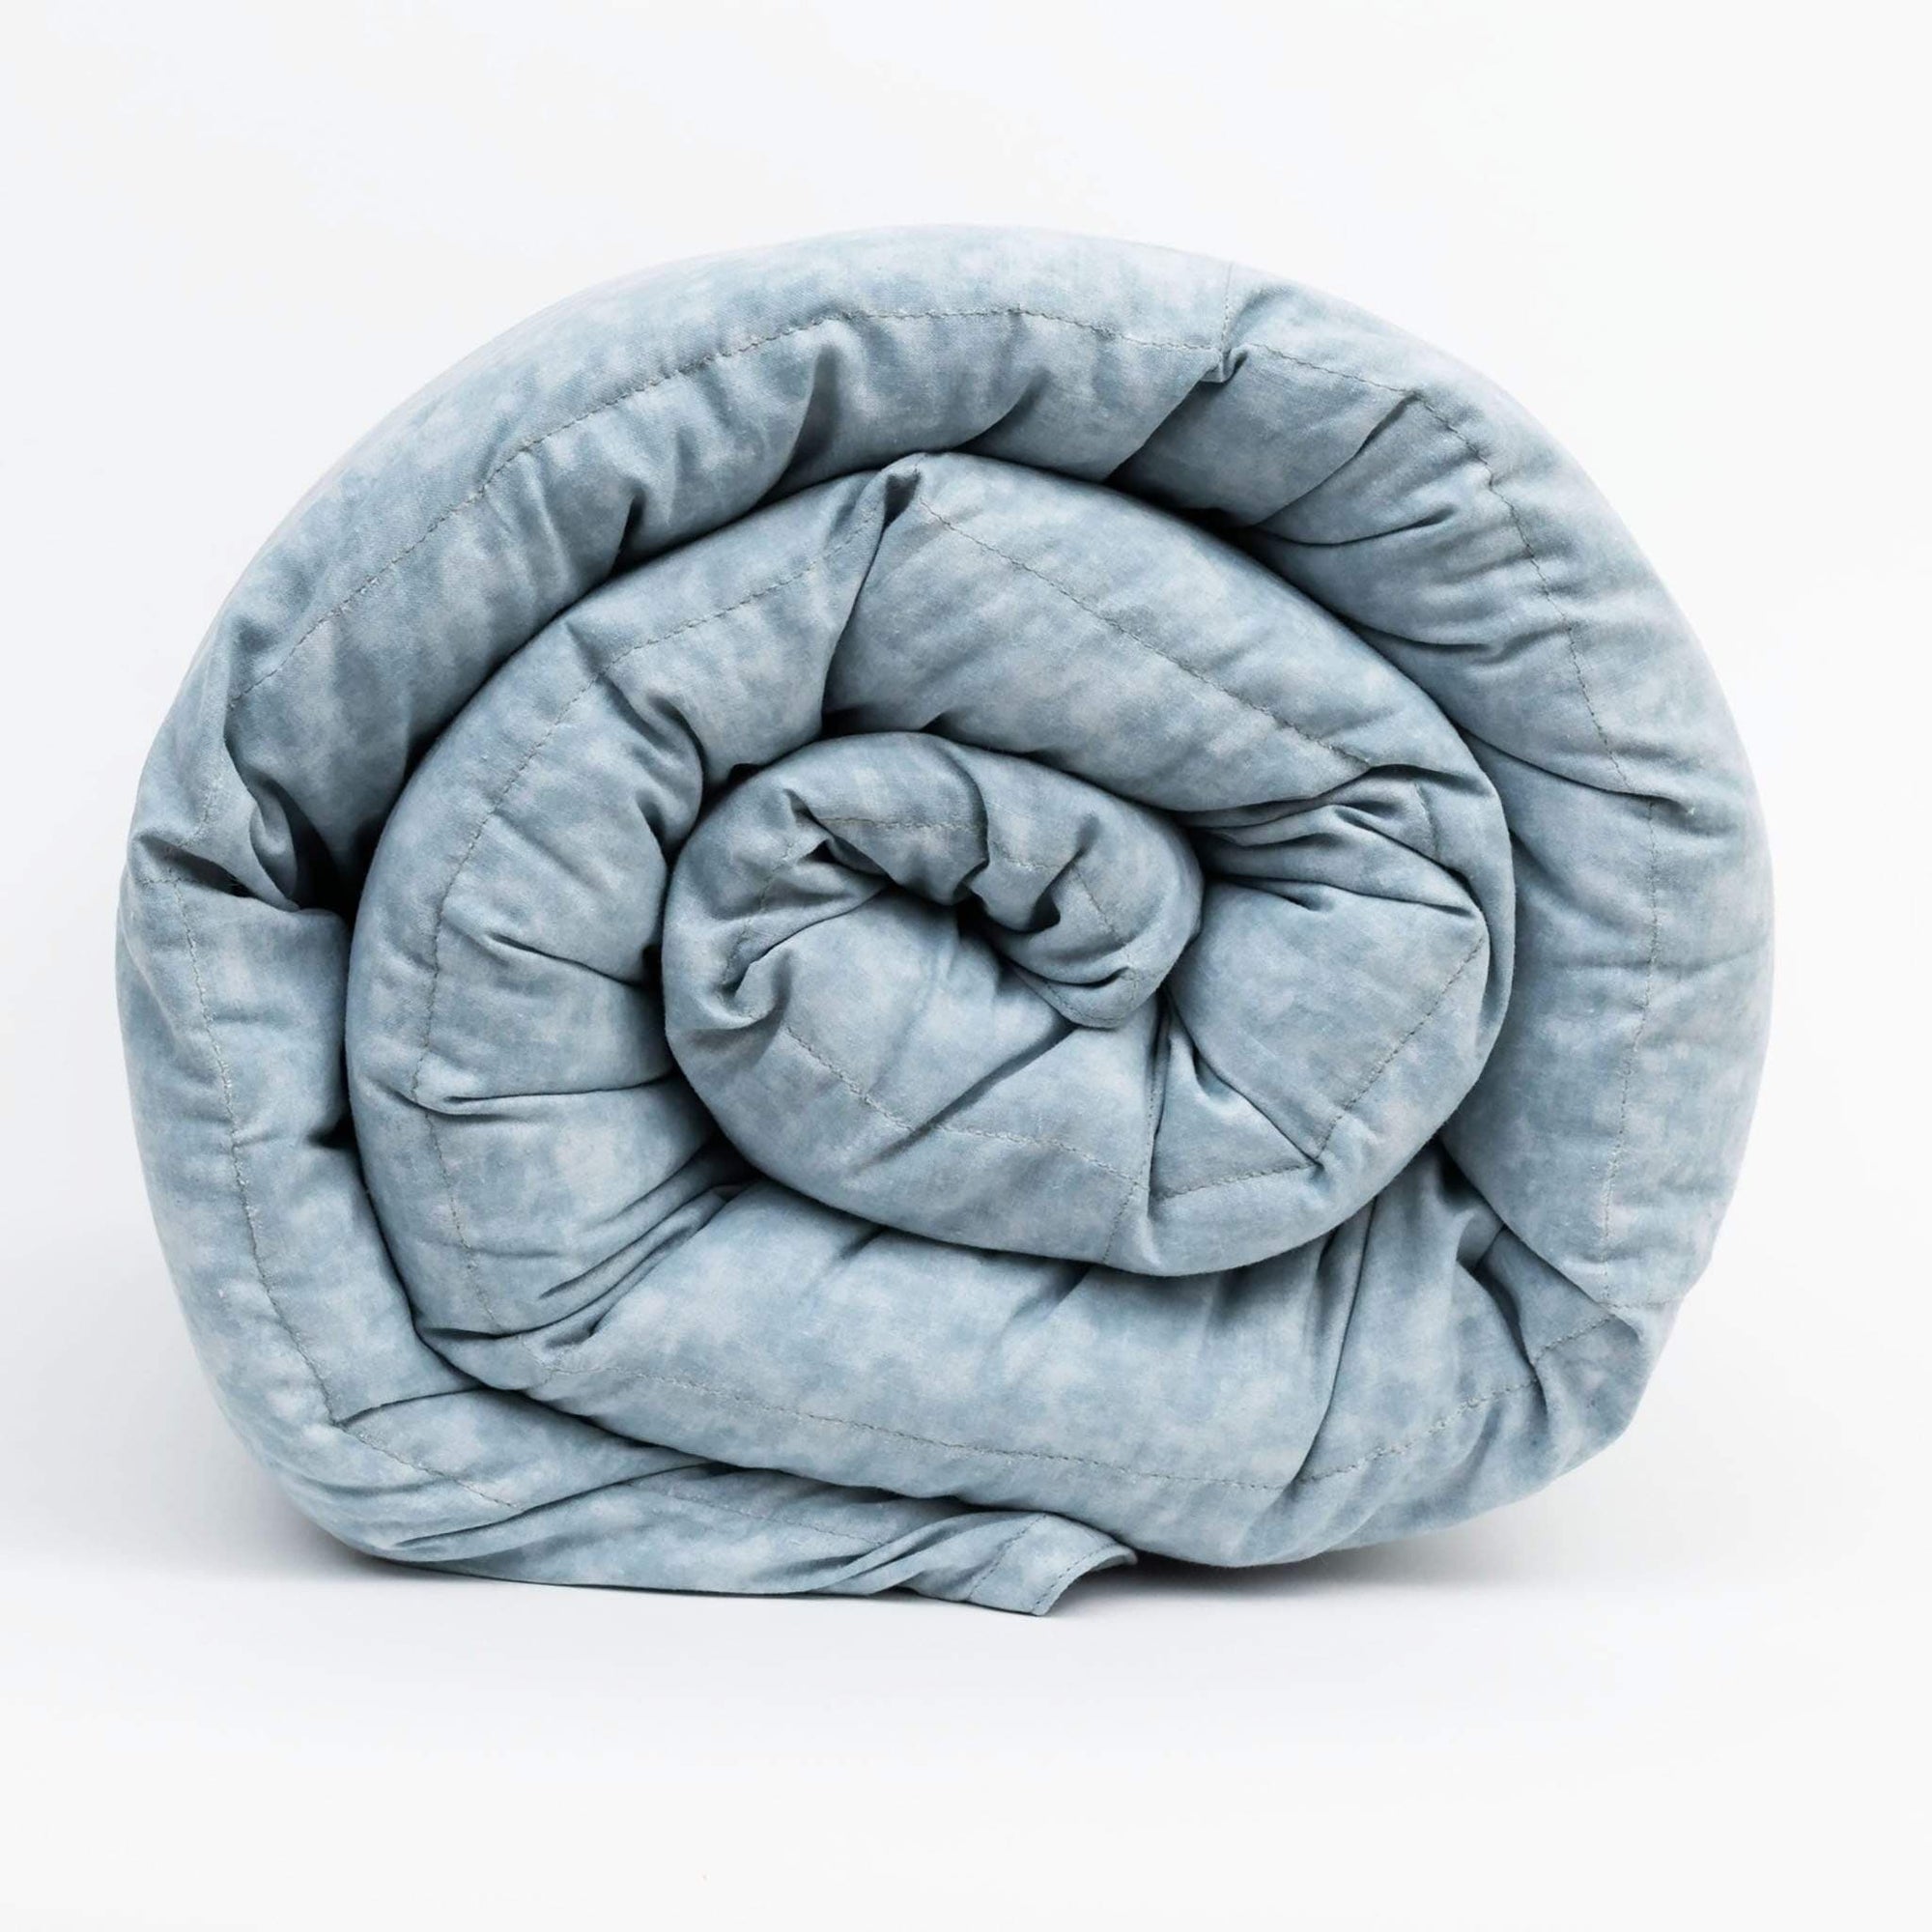 Weighted Blankets in Solid Colors